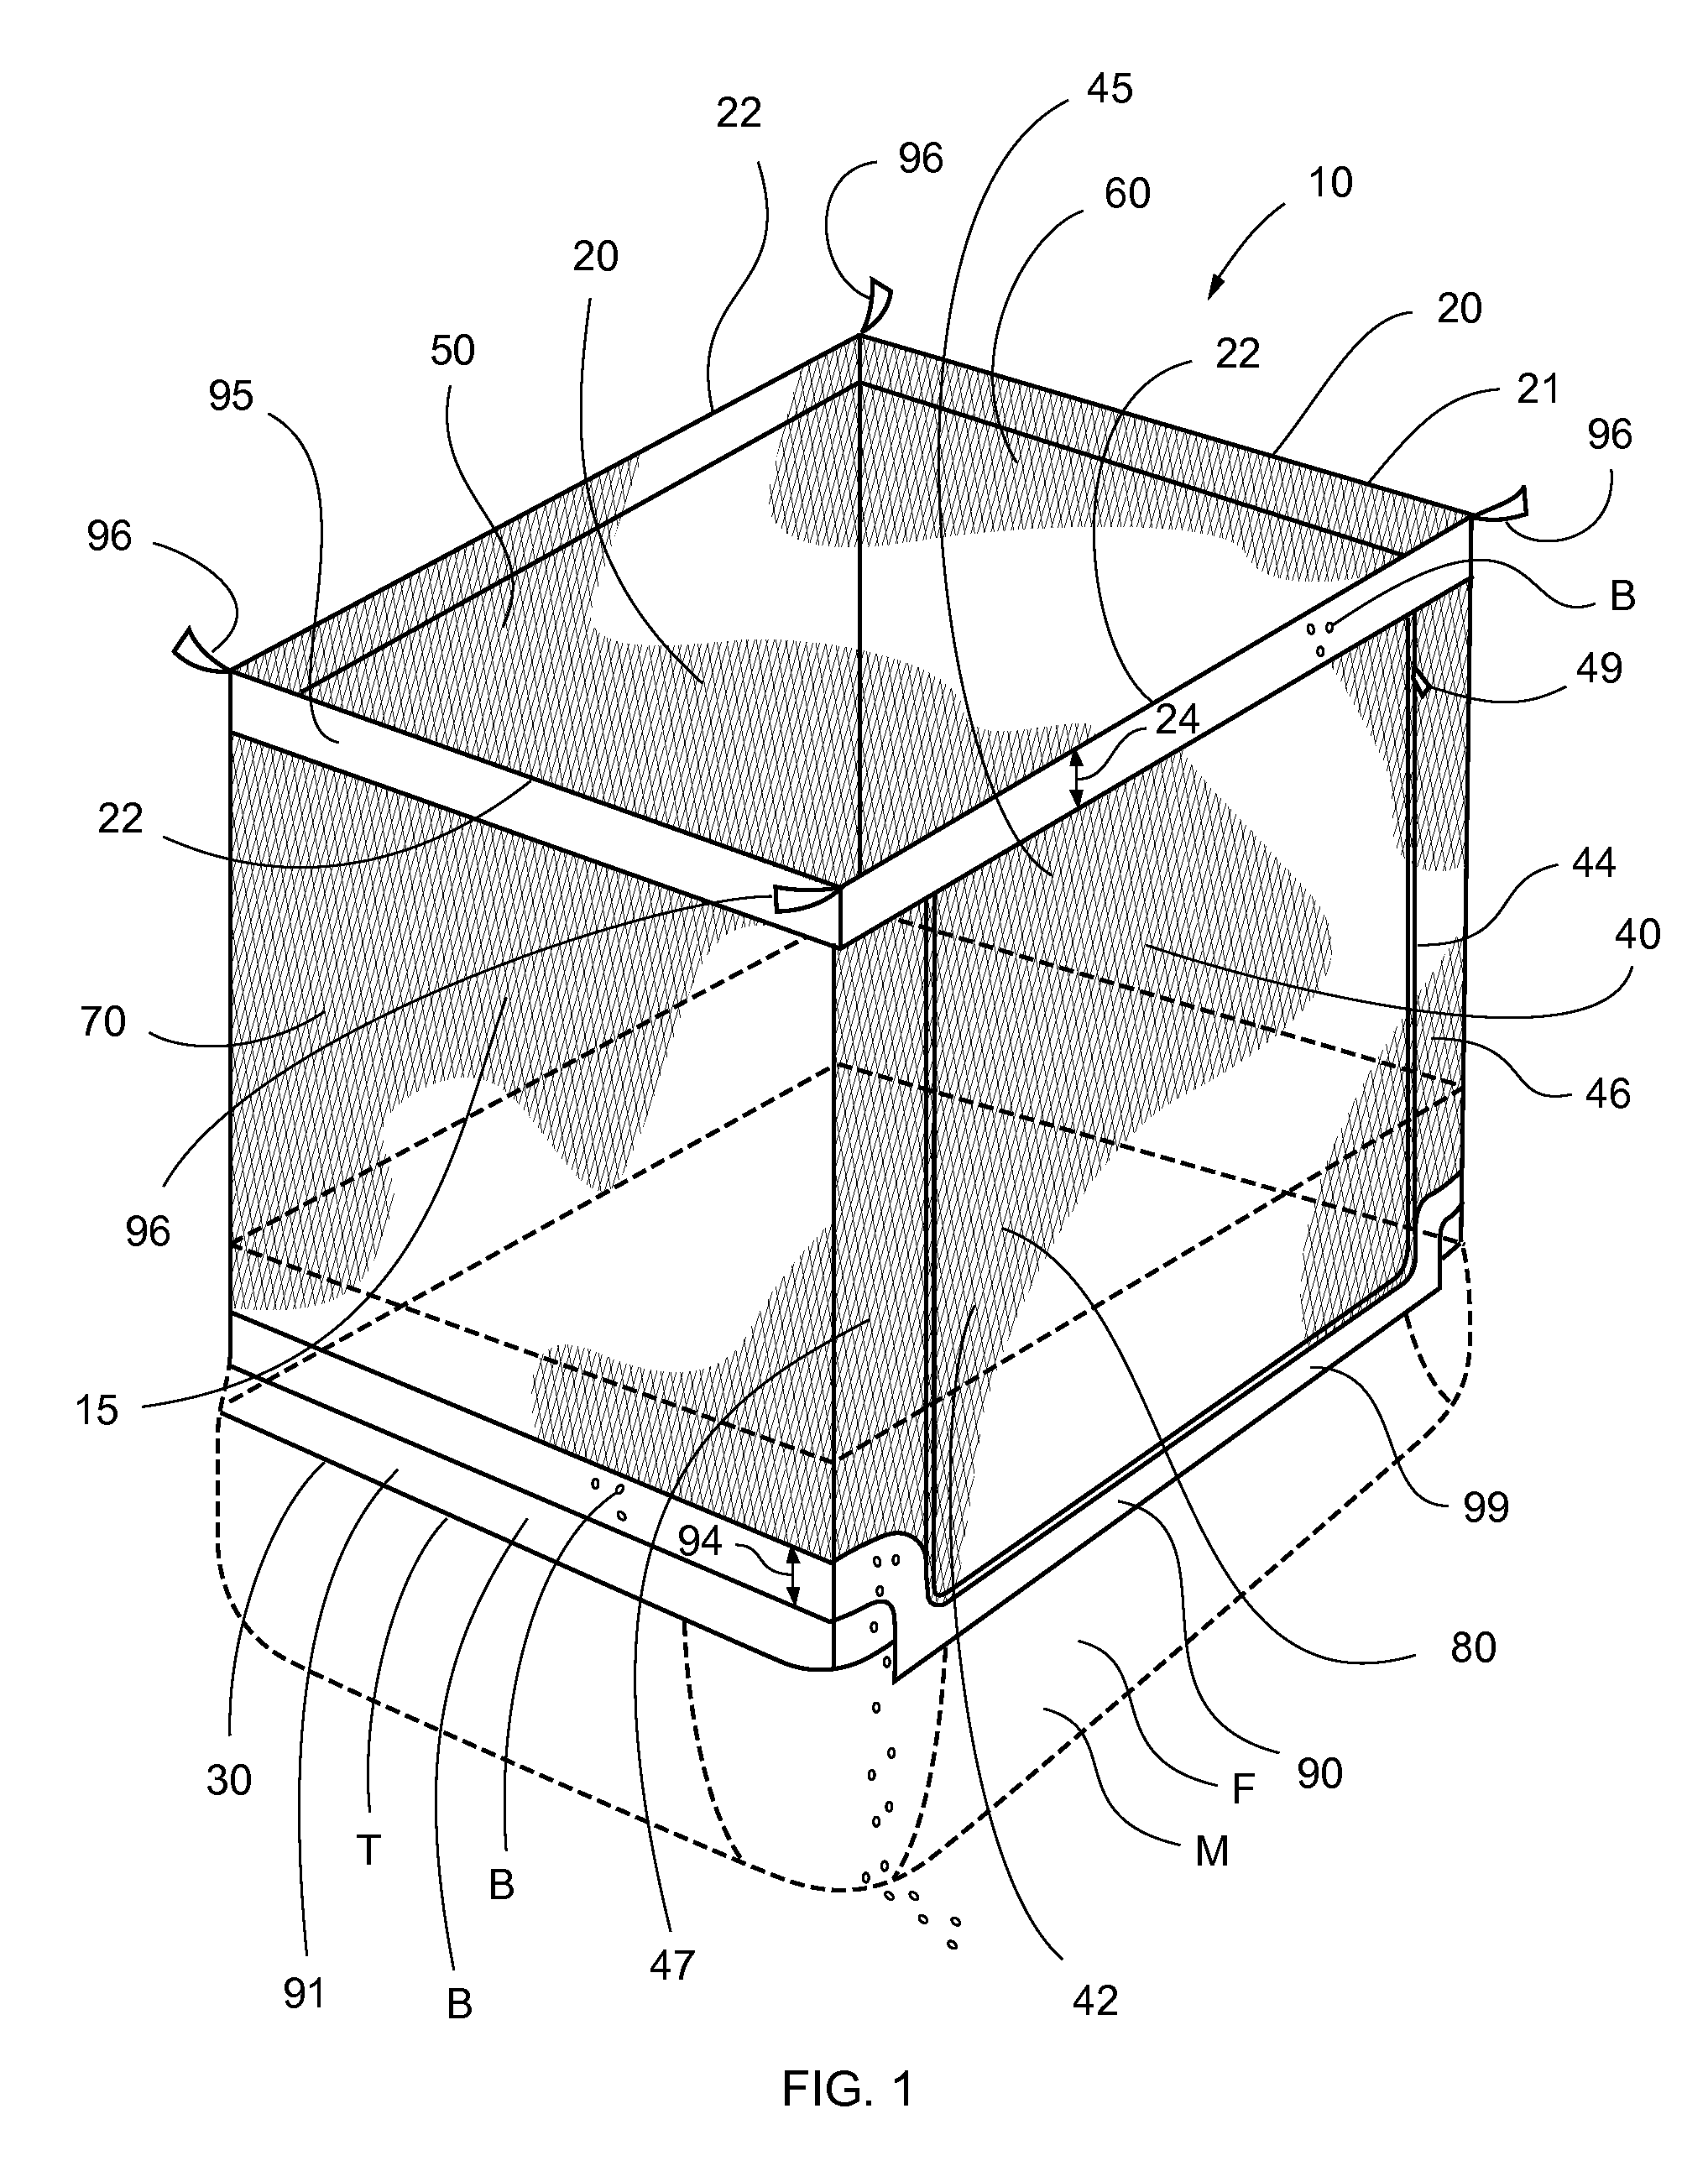 Covering apparatuses for prevention of bed bug intrusion and methods of use thereof